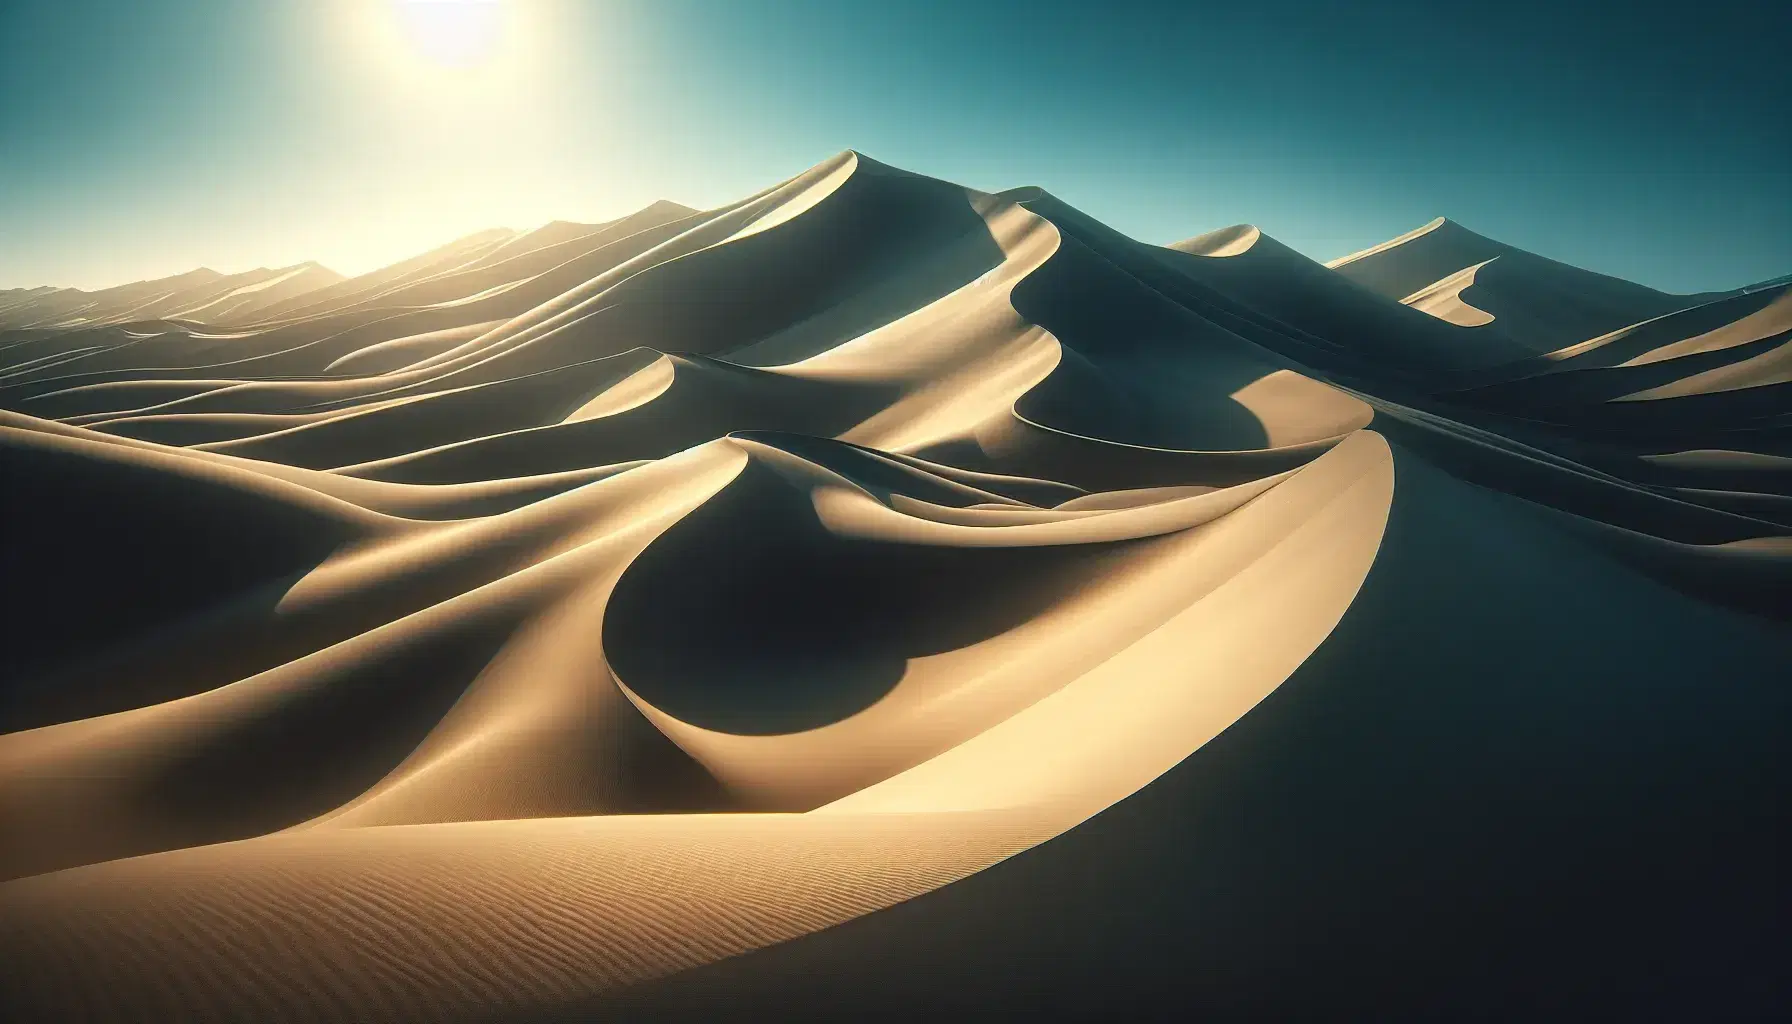 Pristine sand dunes with sharp shadows under a clear blue sky, highlighting the natural curves and gradients of the desert landscape.